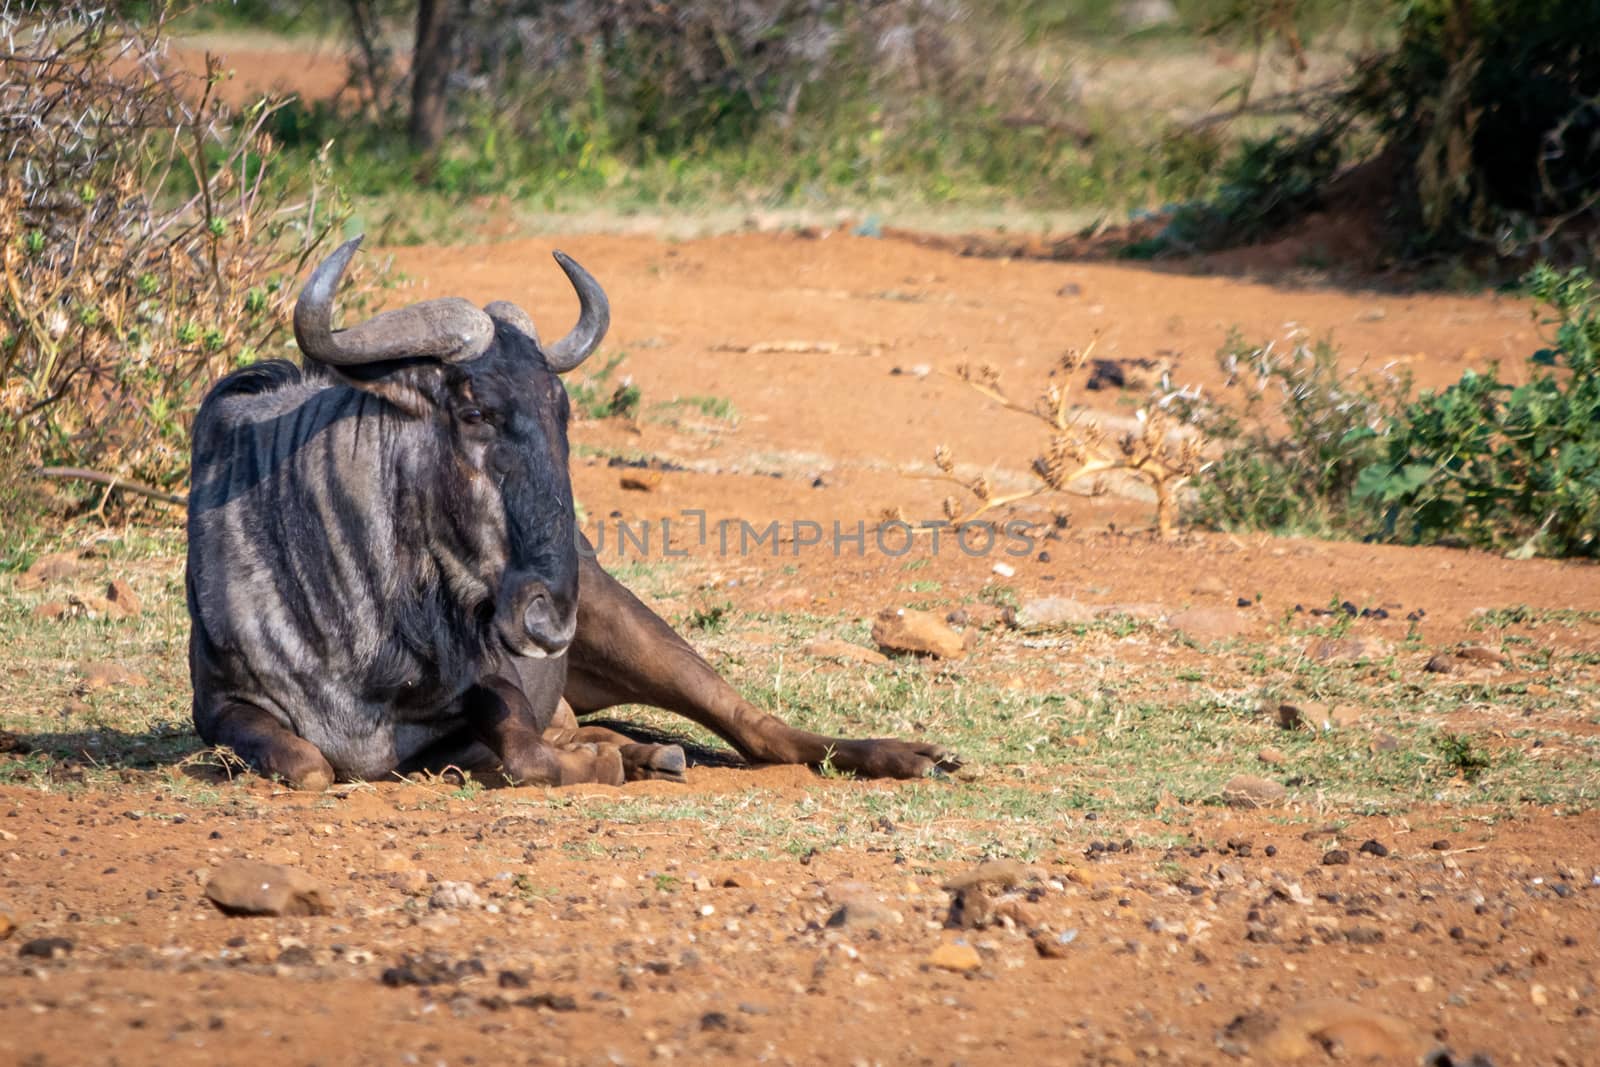 Blue wildebeest lying on in the grass and sand of African savannah during a safari trip by kb79